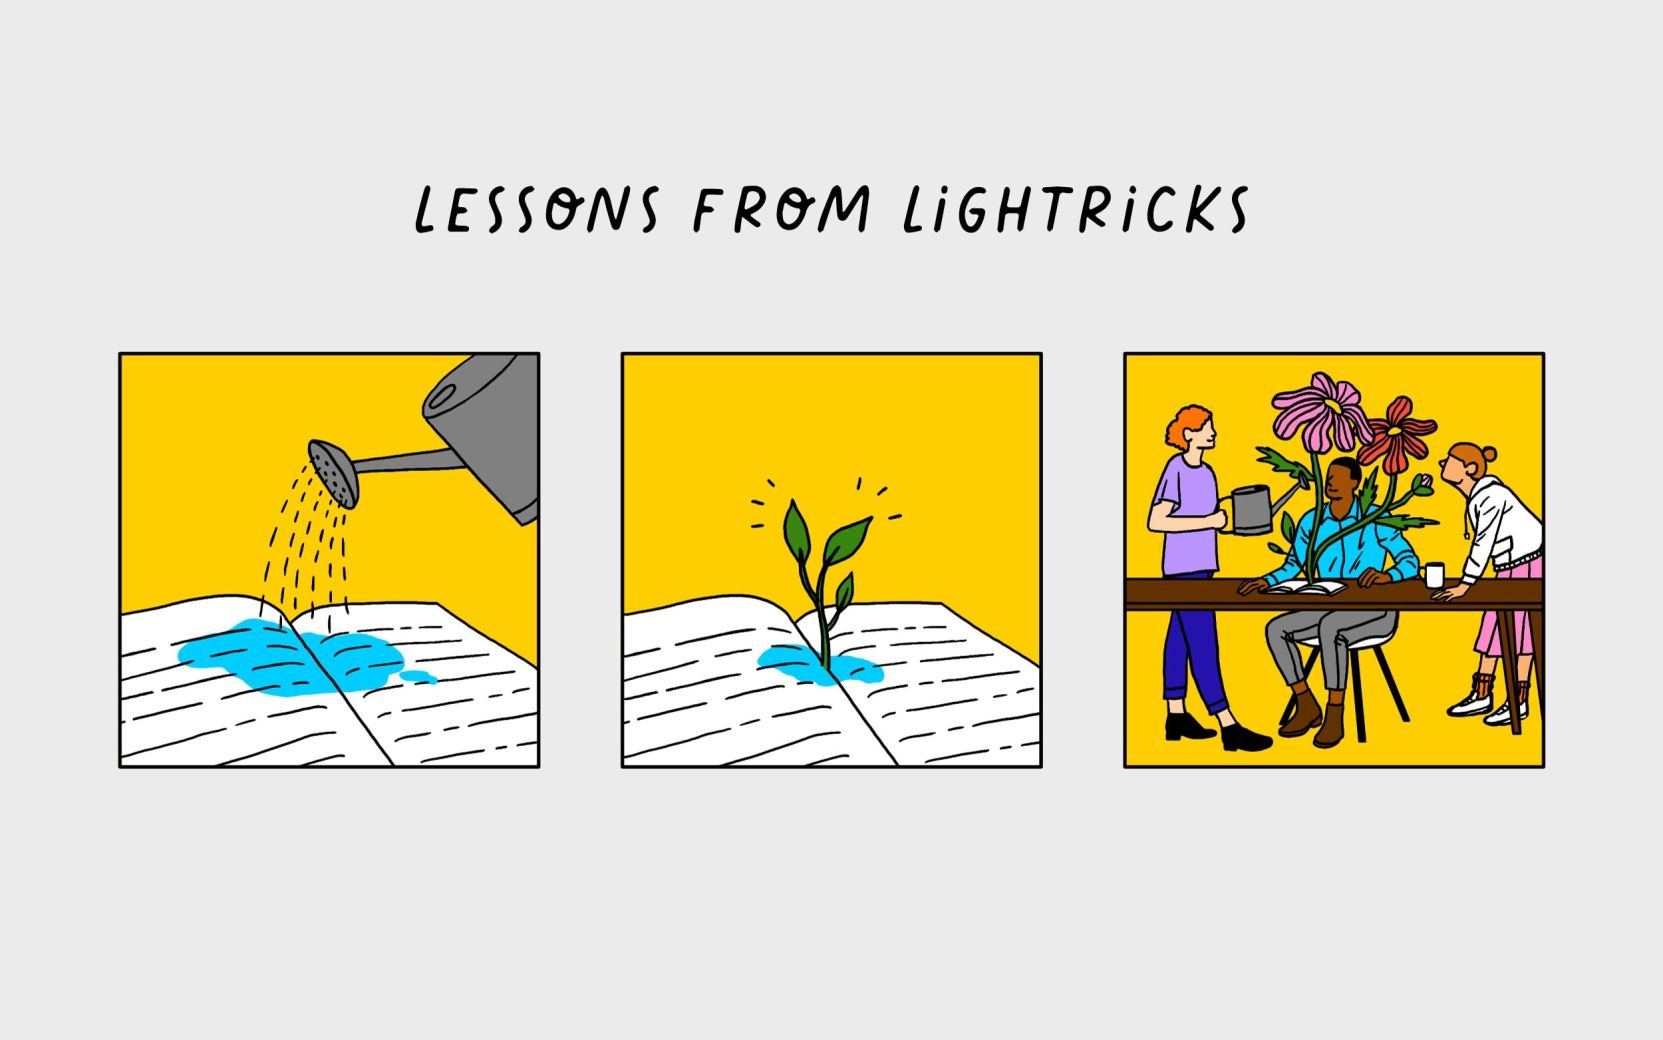 Lessons from lightricks